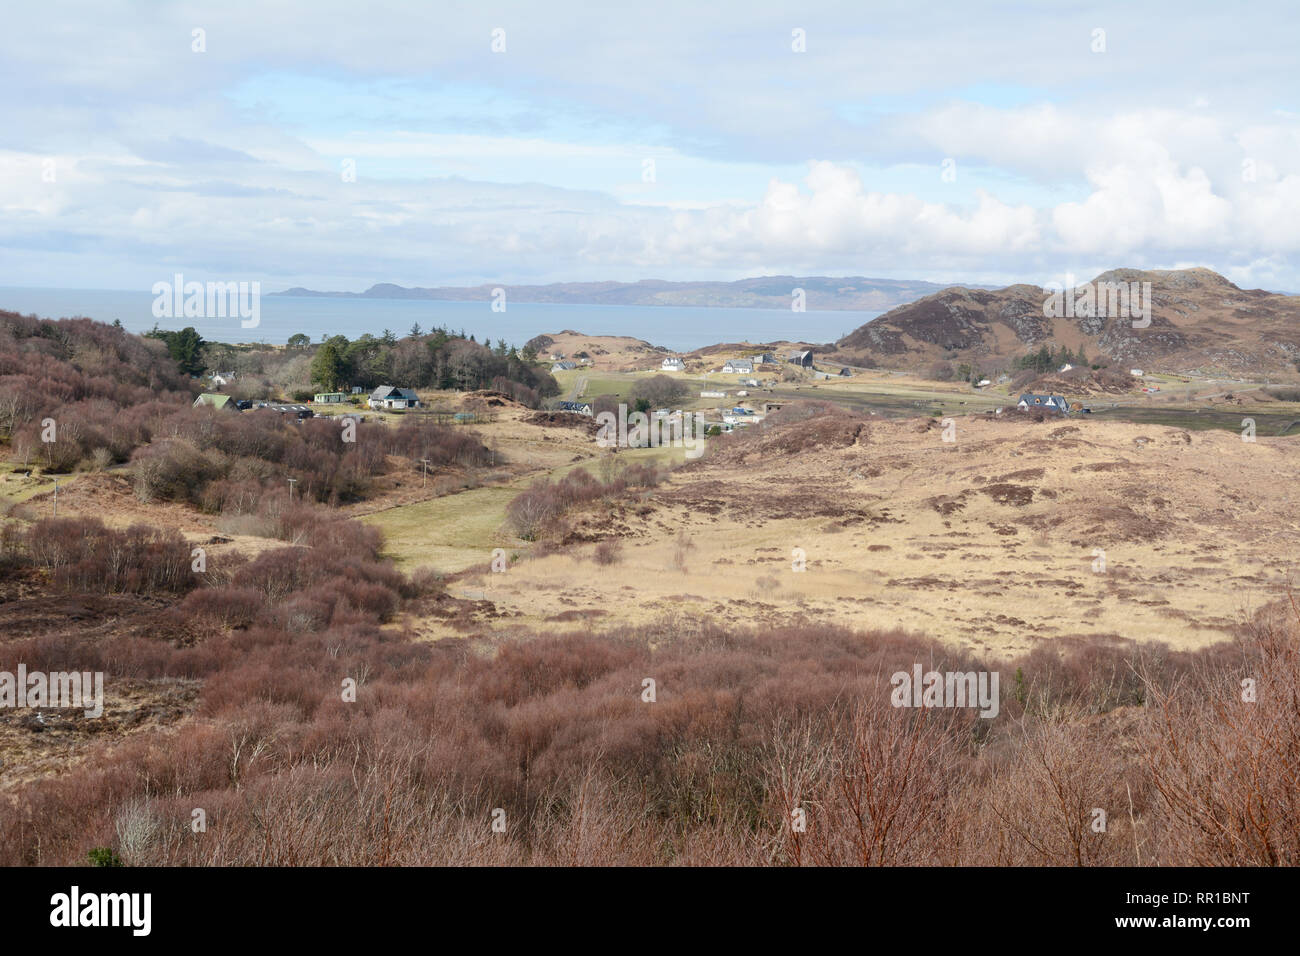 A small village on the outskirts of the town of Mallaig, in Lochaber, on the west coast of the Scottish Highlands, Scotland, United Kingdom. Stock Photo